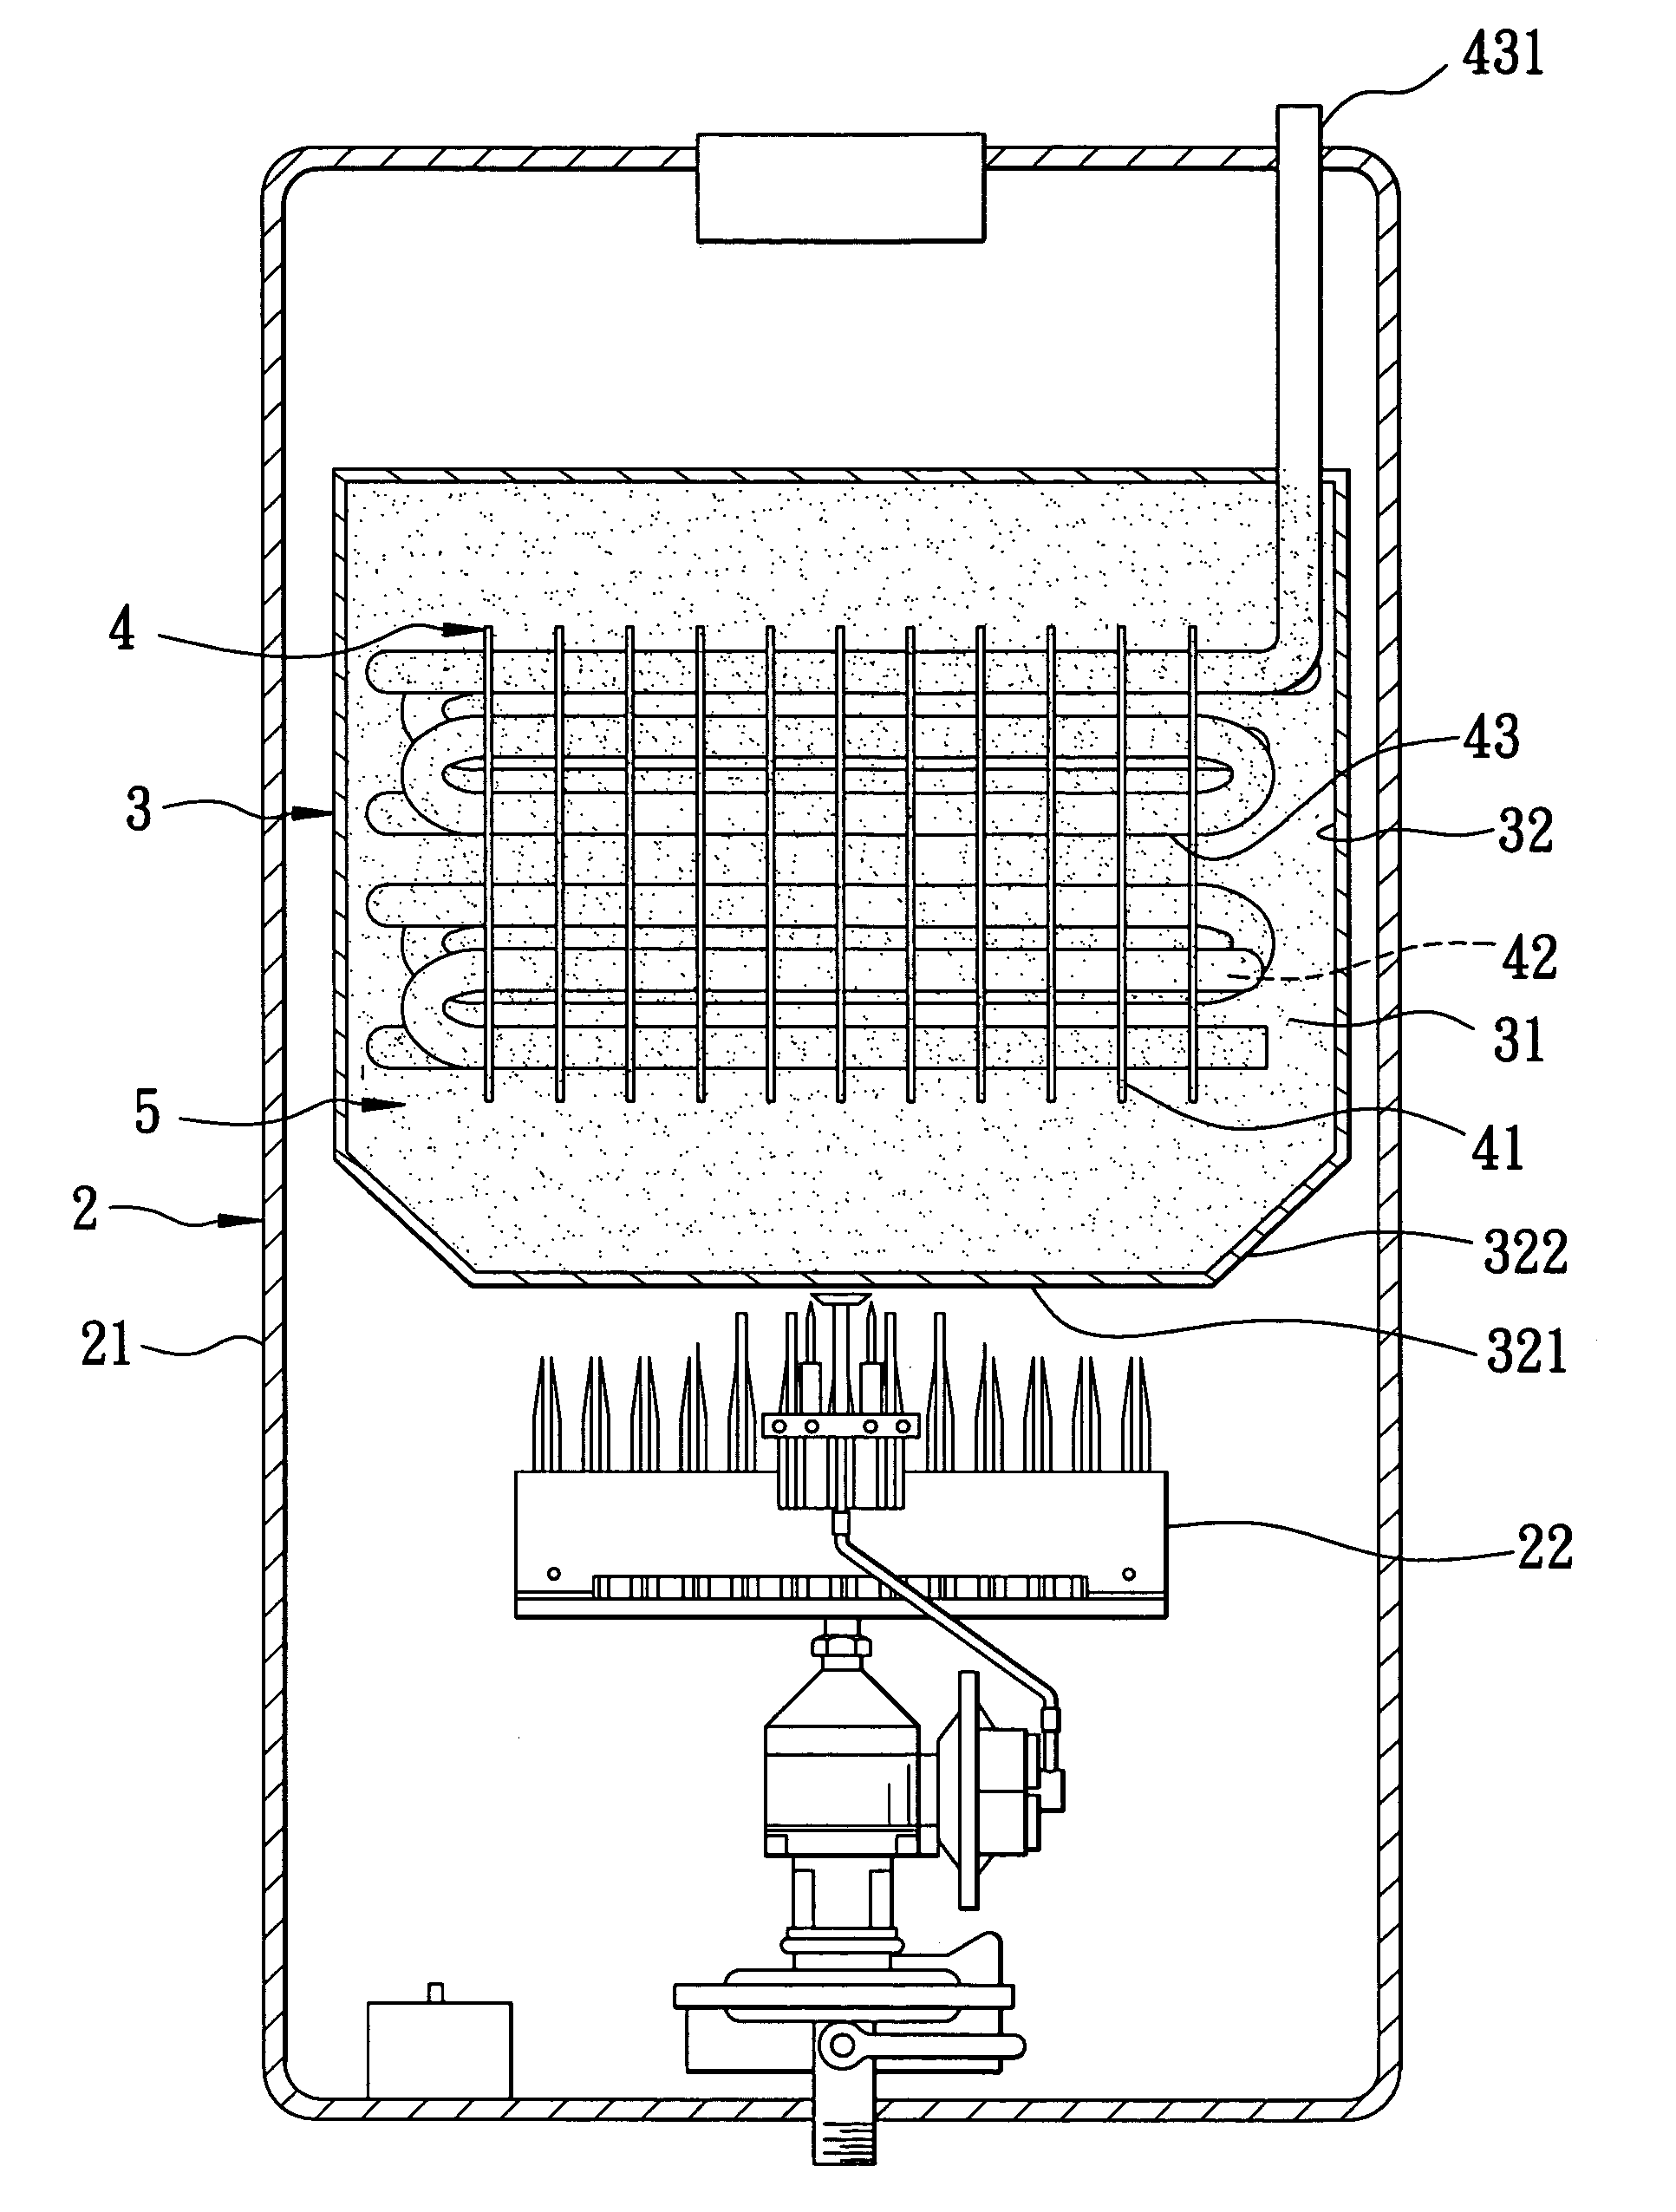 Heat conducting assembly for a water heater, and method for making the heat conducting assembly